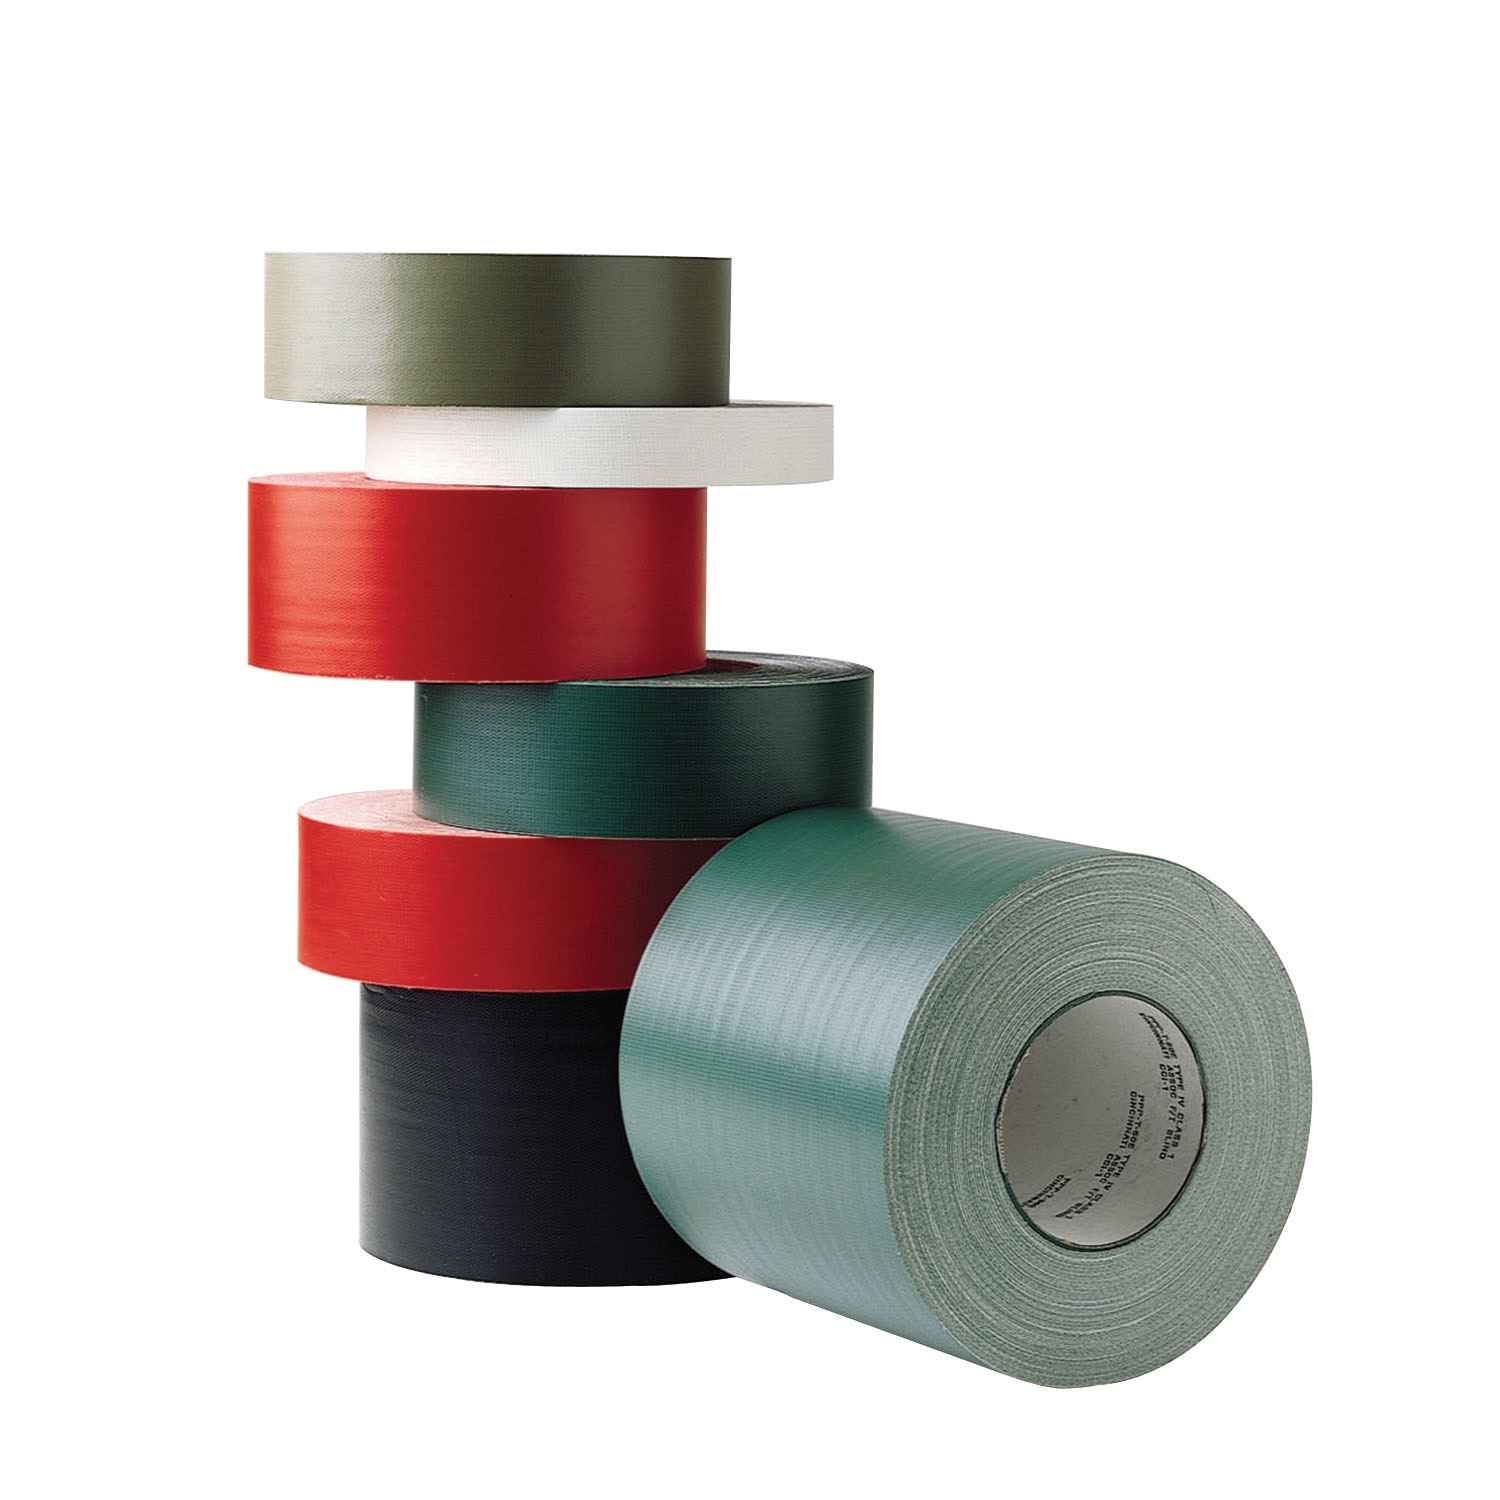 ABILITY ONE 7510-00-890-9872 Waterproof Tape,Olive,Woven Cloth 